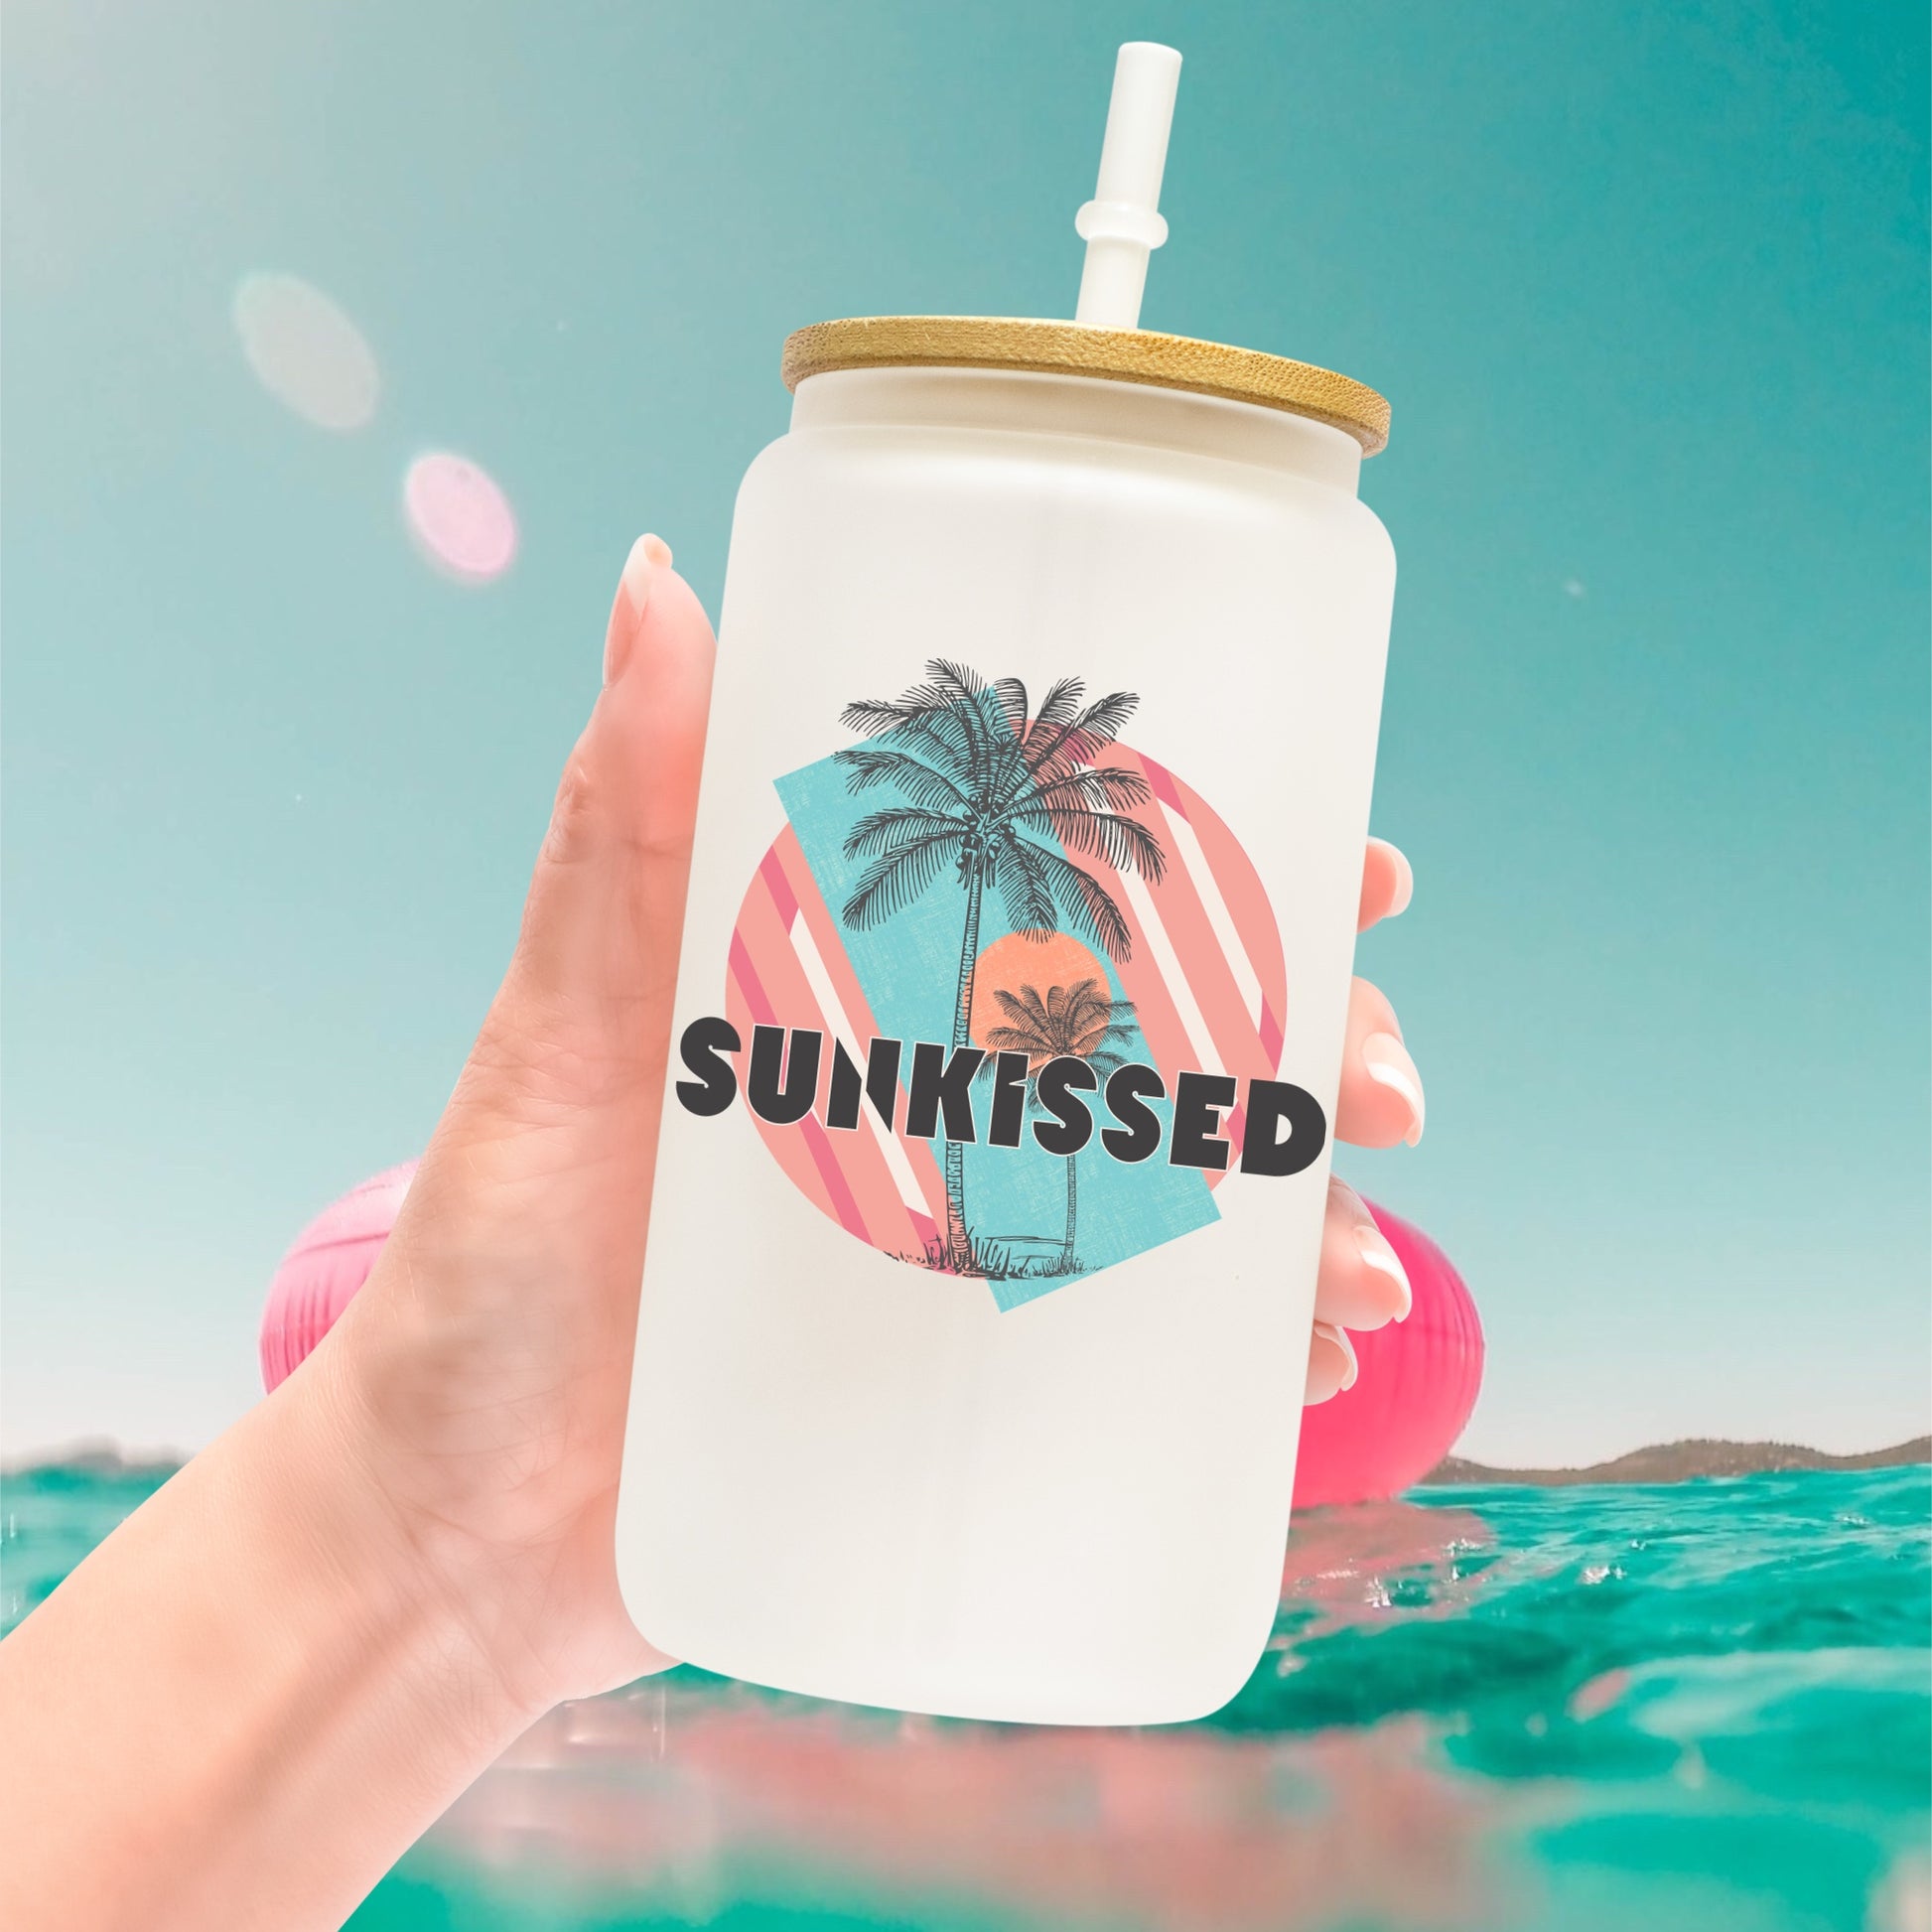 Permanent adhesive Decal transfer with palm trees and the sun, as well as the phrase "Sunkissed"